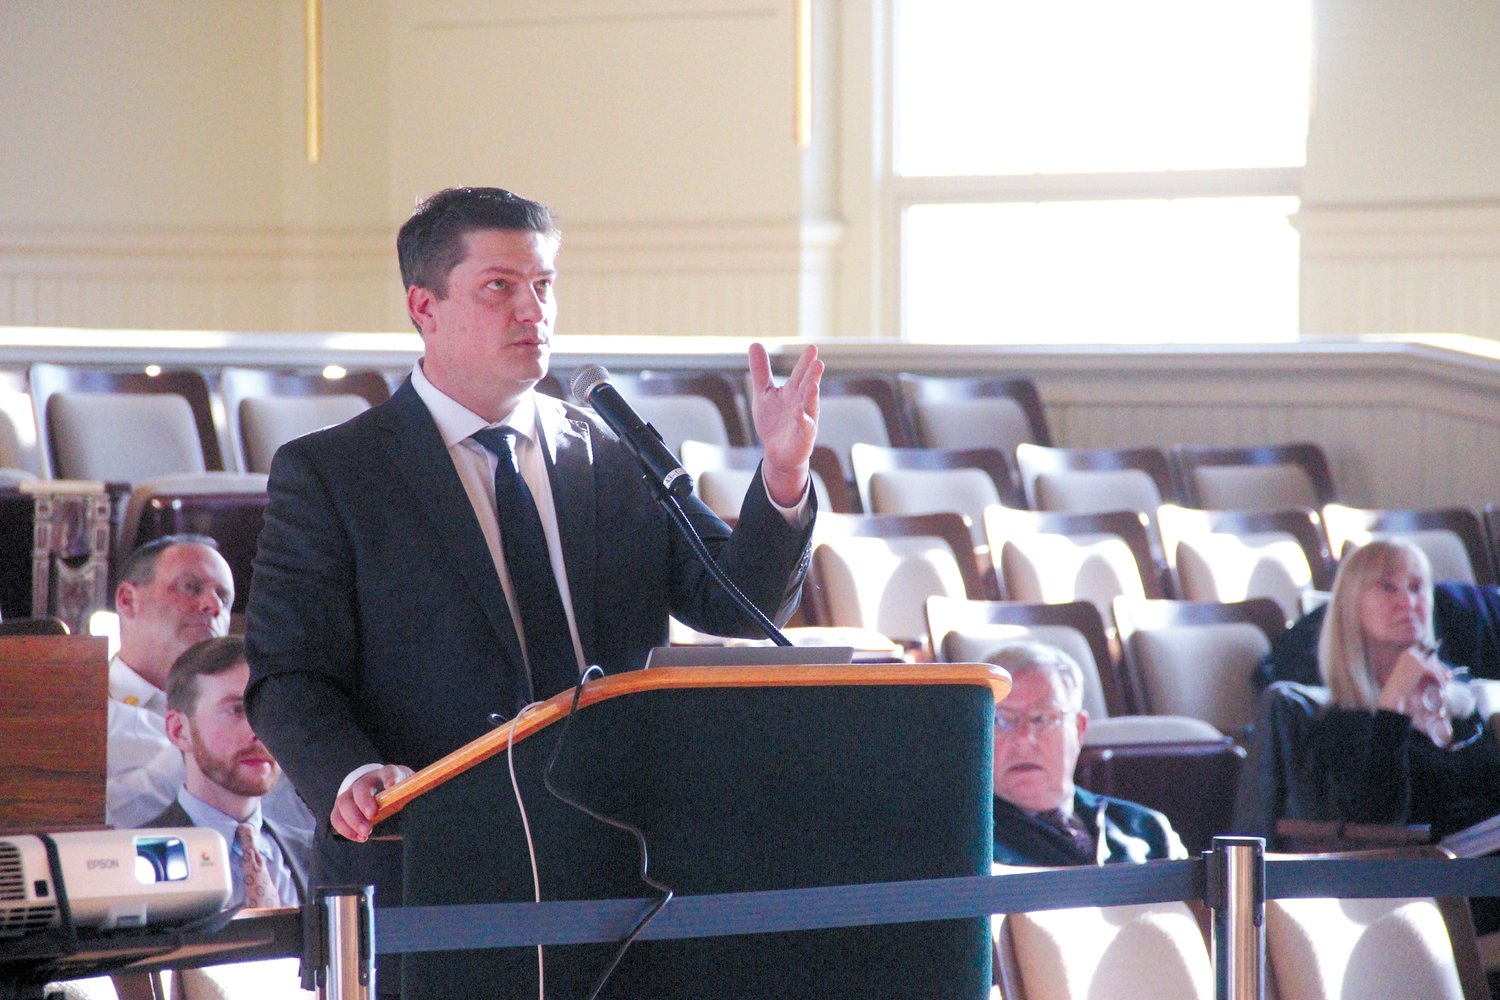 WITH A PLAN TO FUND RETIREE HEALTH CARE: Joseph Newton of GRS Consulting, the City’s actuary, outlined a 30 year plan to address $395 million in unfunded city liability to pay for retiree health care benefits. (Warwick Beacon photo)